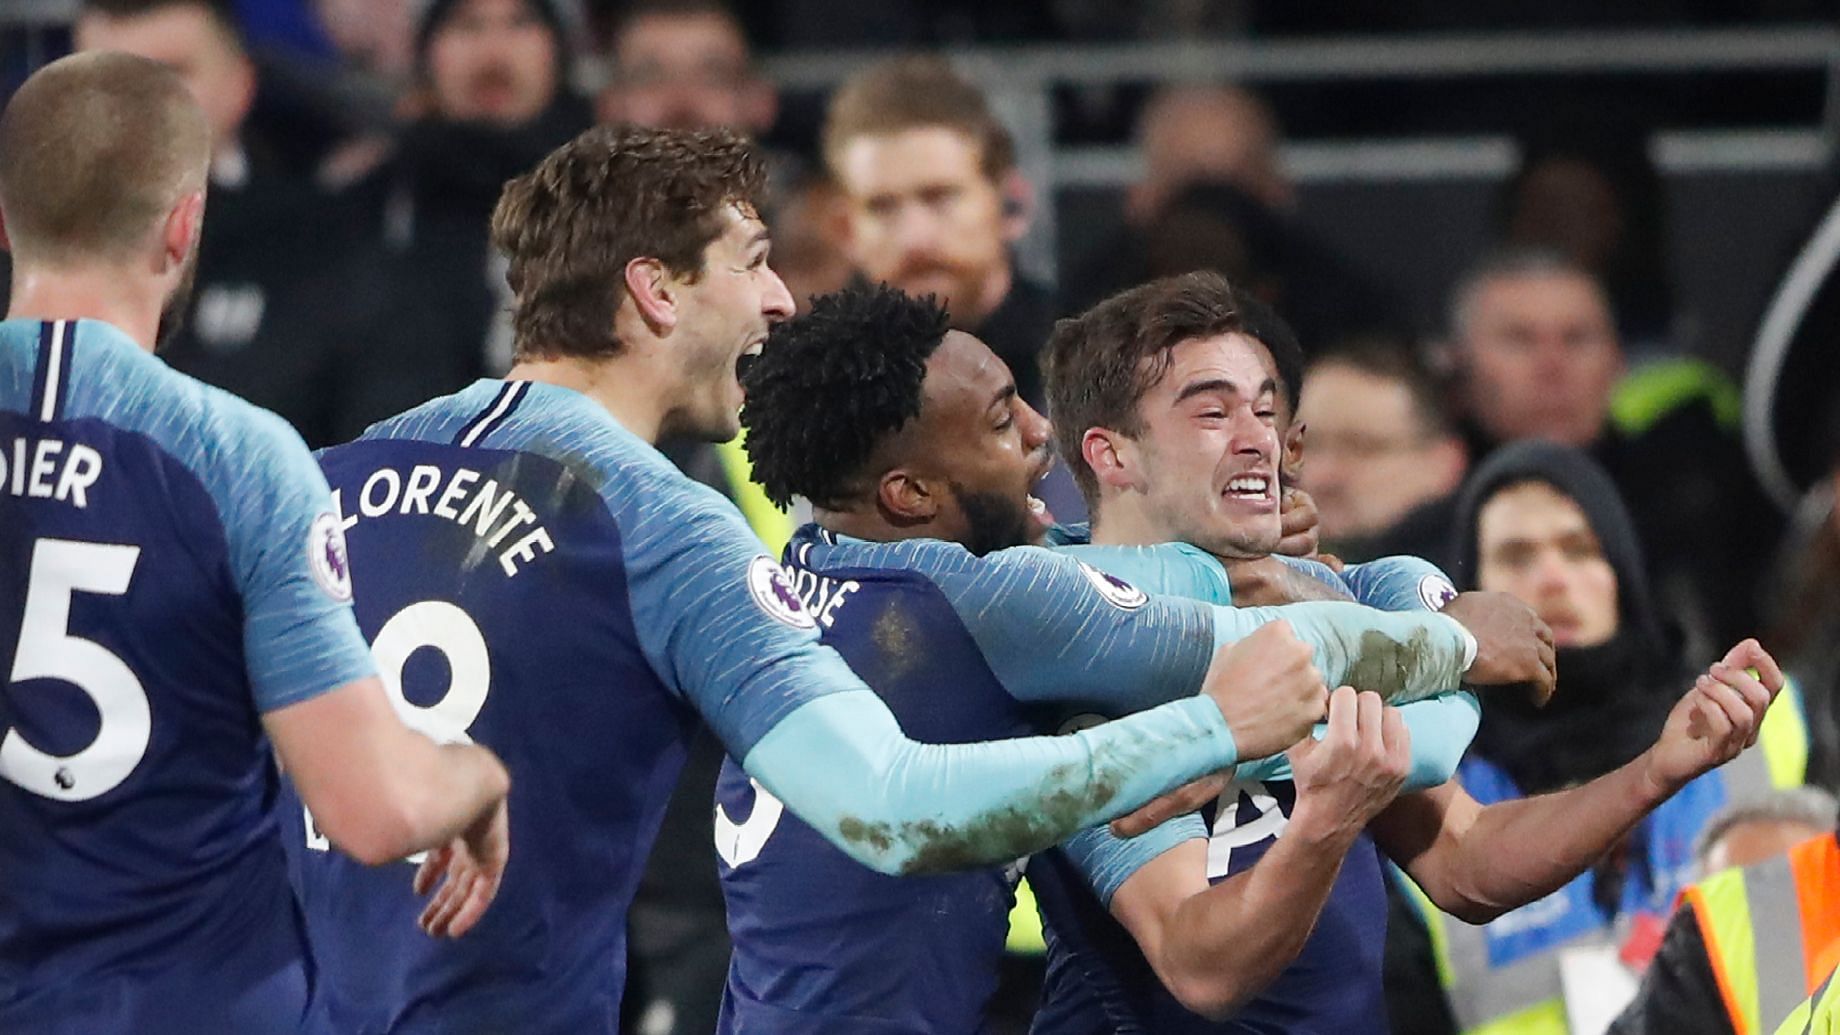 Tottenham Hotspur players are jubilant after Harry Winks’ (right) 93rd-minute goal handed Spurs a 2-1 win over Fulham in the Premier League.